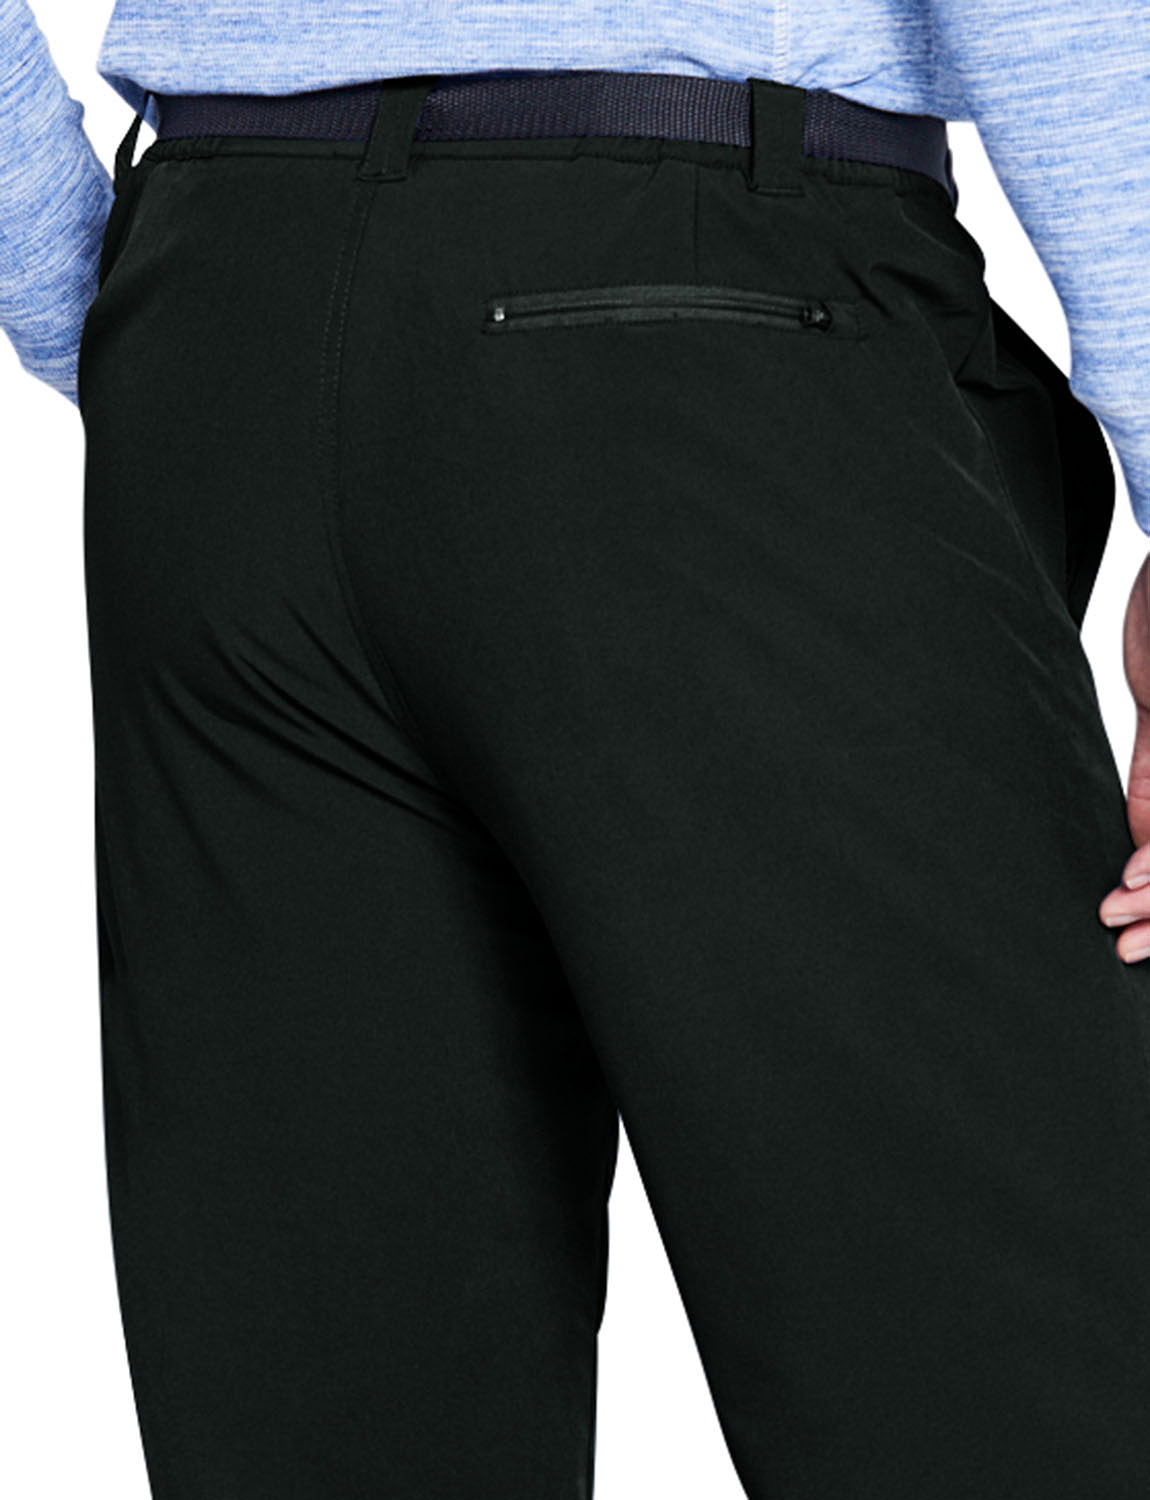 Pegasus Water Resistant Anti Pill Fleece Lined 2 Way Stretch Trouser ...